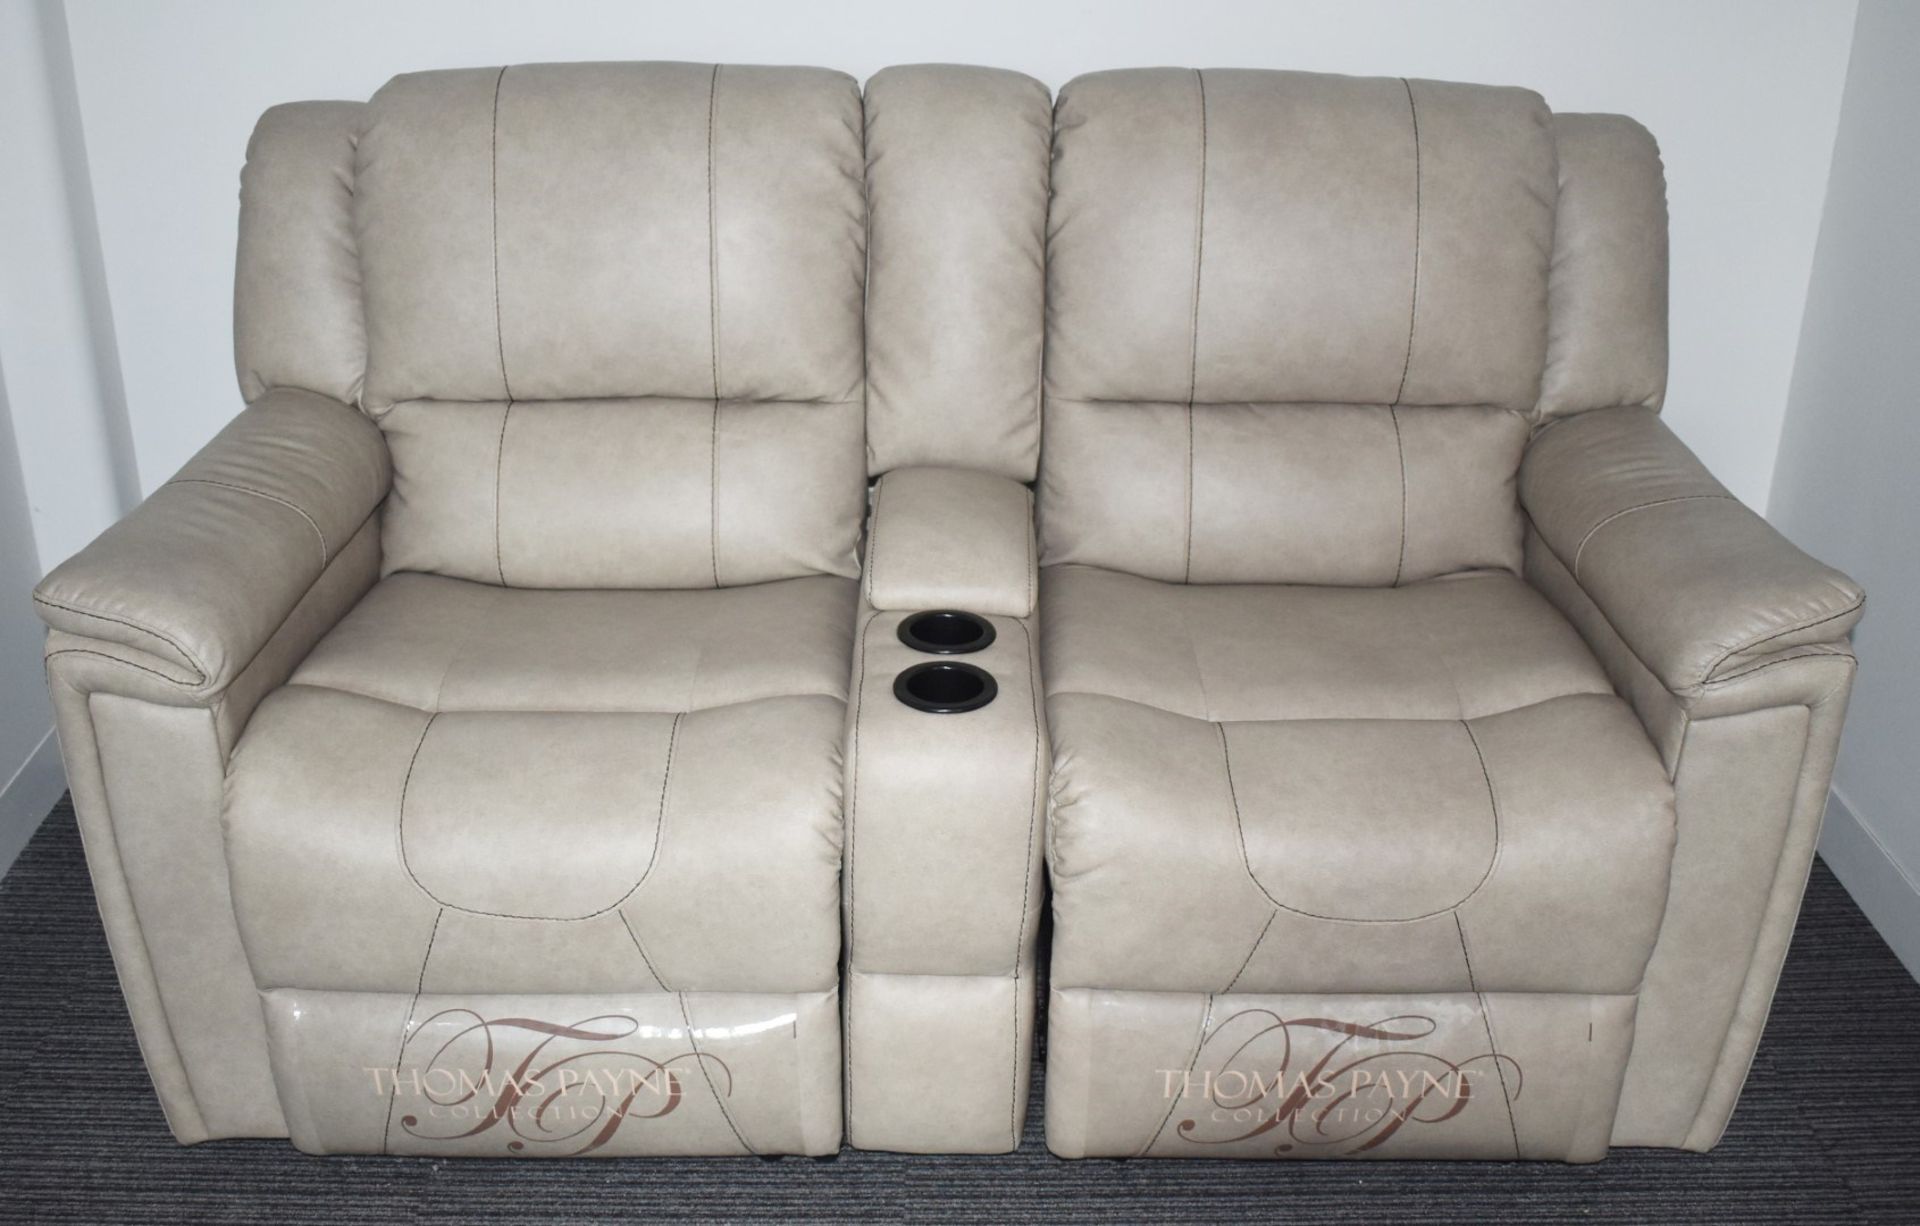 1 x Thomas Payne Reclining Wallhugger Theater Seating Love Seat Couch With Center Console and - Image 8 of 9